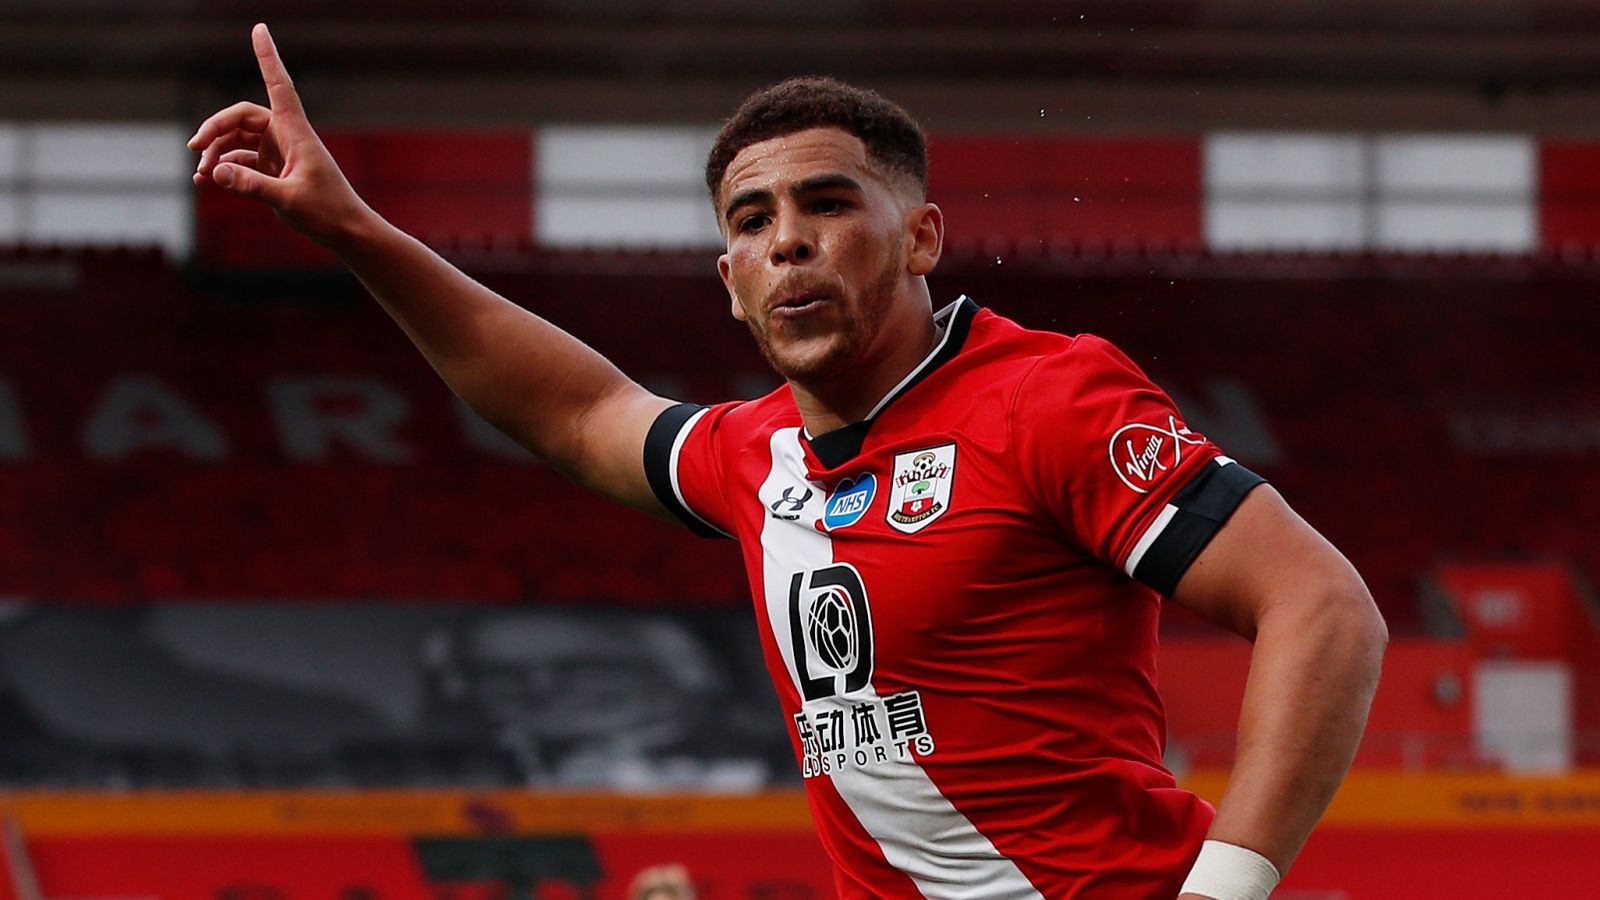 che-adams-southampton-striker-glad-to-have-turned-around-difficult-start-to-life-at-st-marys